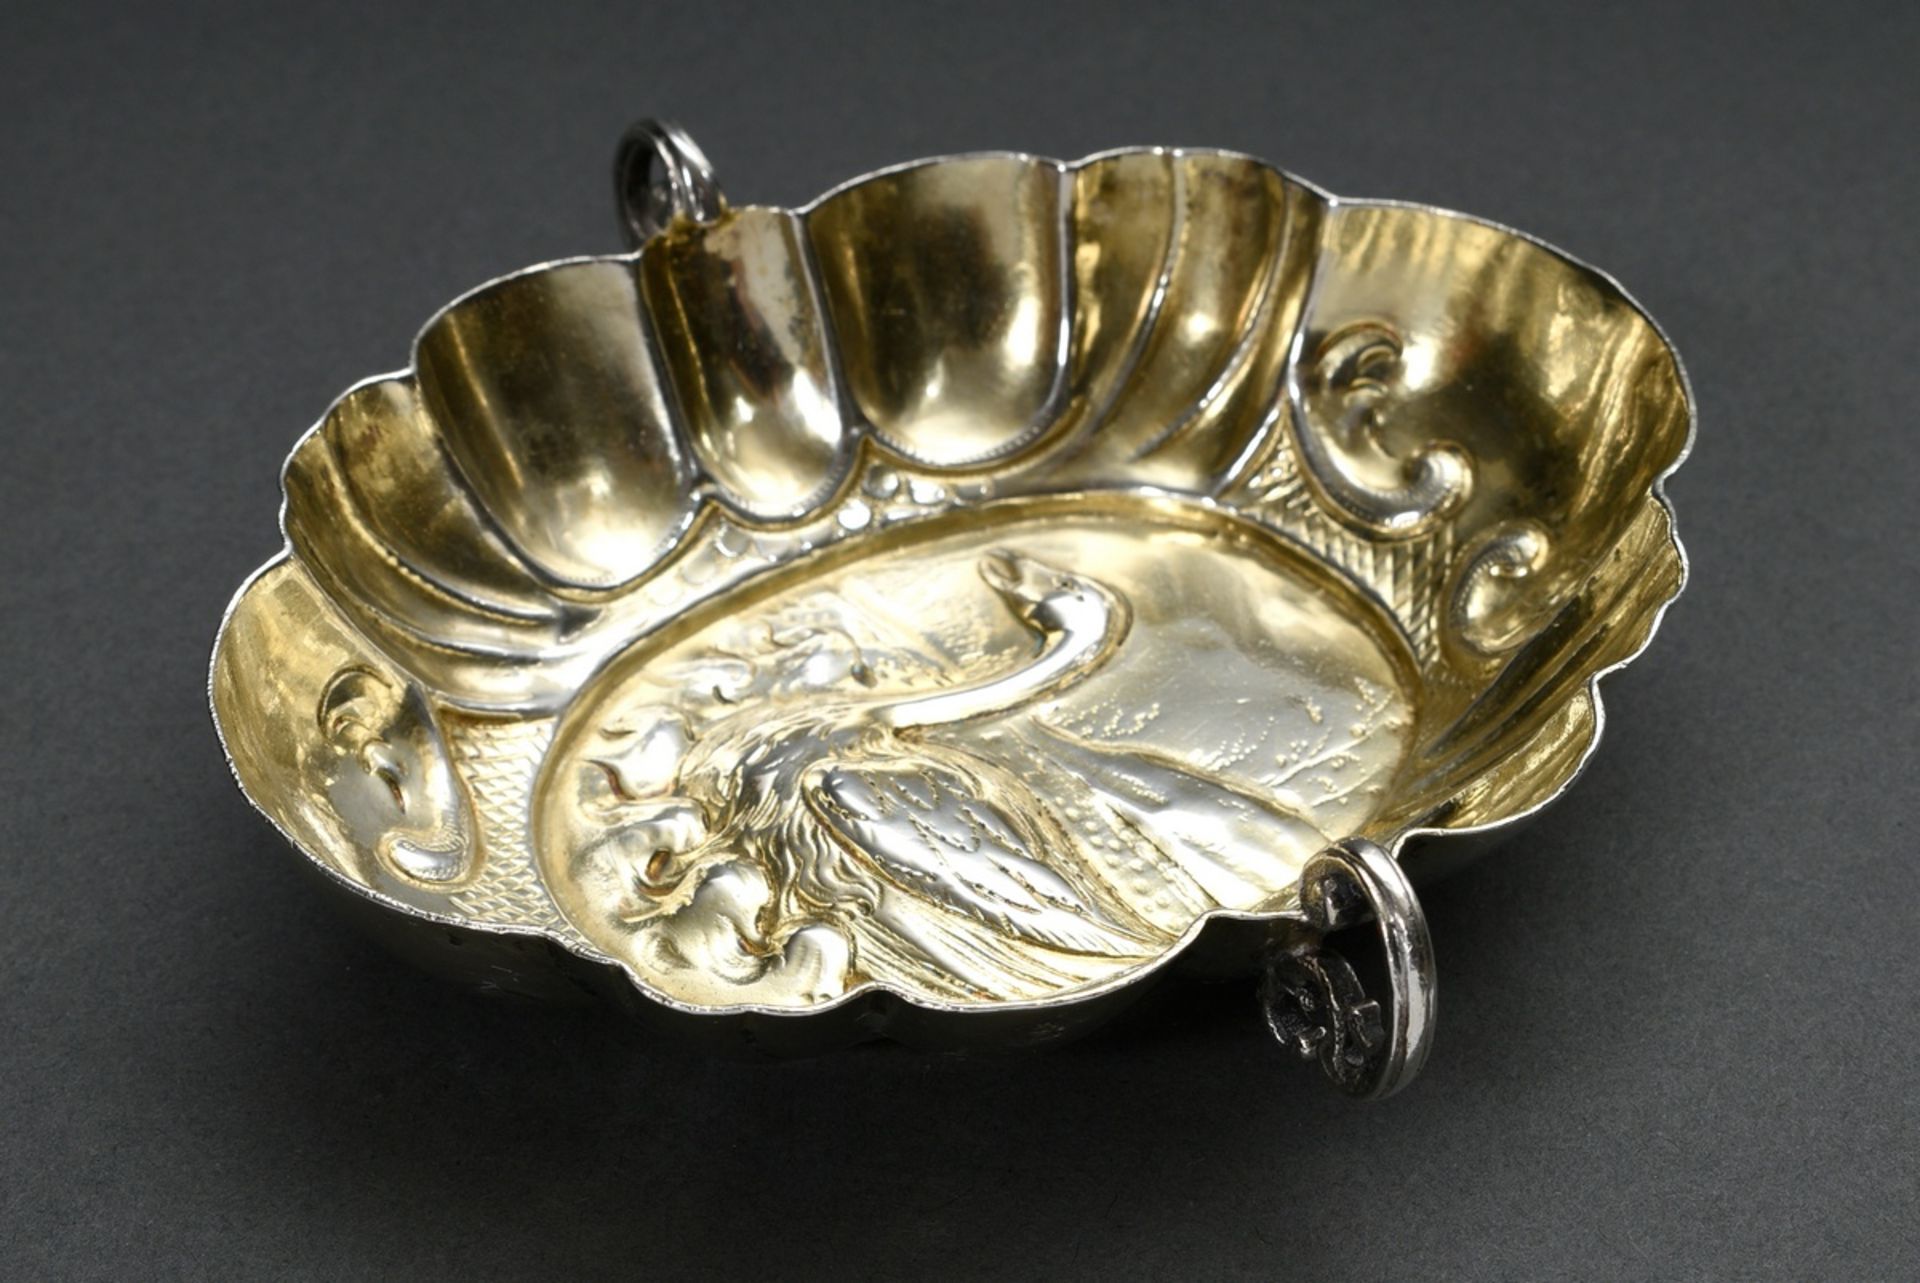 Augsburg wine tasting bowl with humped chased wall and "swan" motif in the mirror, MZ: Paul Höschel